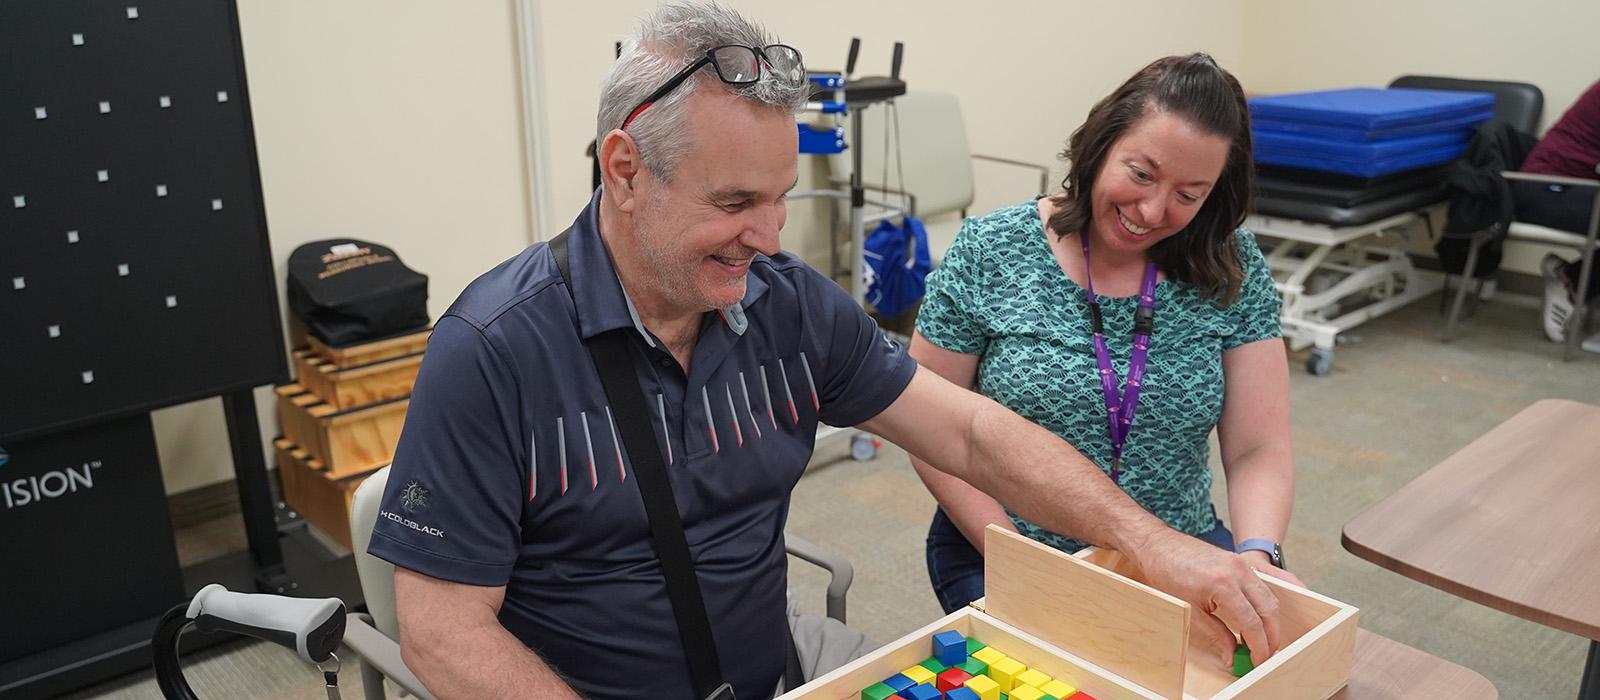 A stroke patient sorting blocks as a stroke recovery exercise